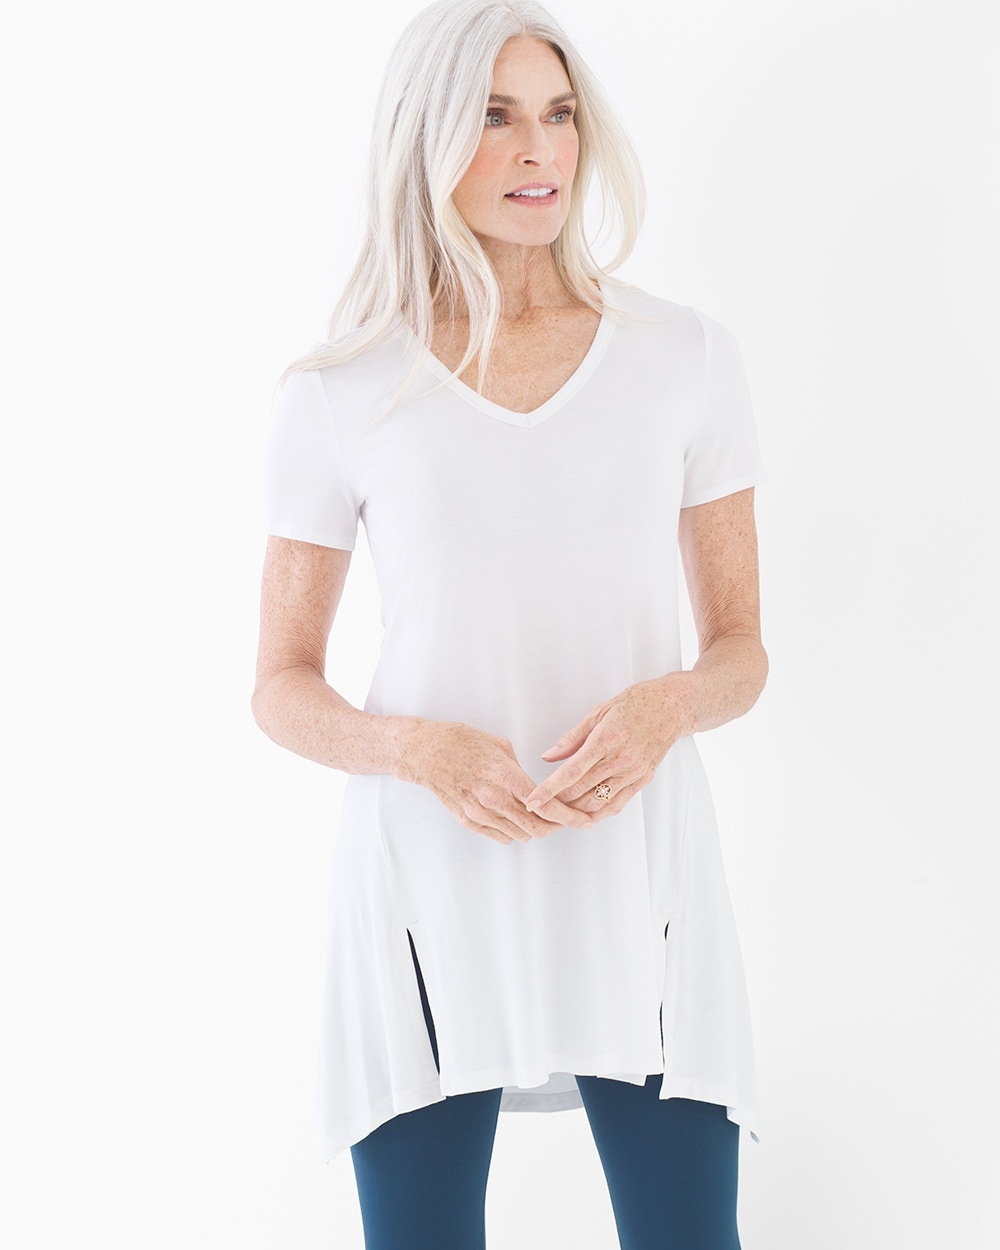 Style Essentials Soft Jersey Short Sleeve Tunic Tee Bright White